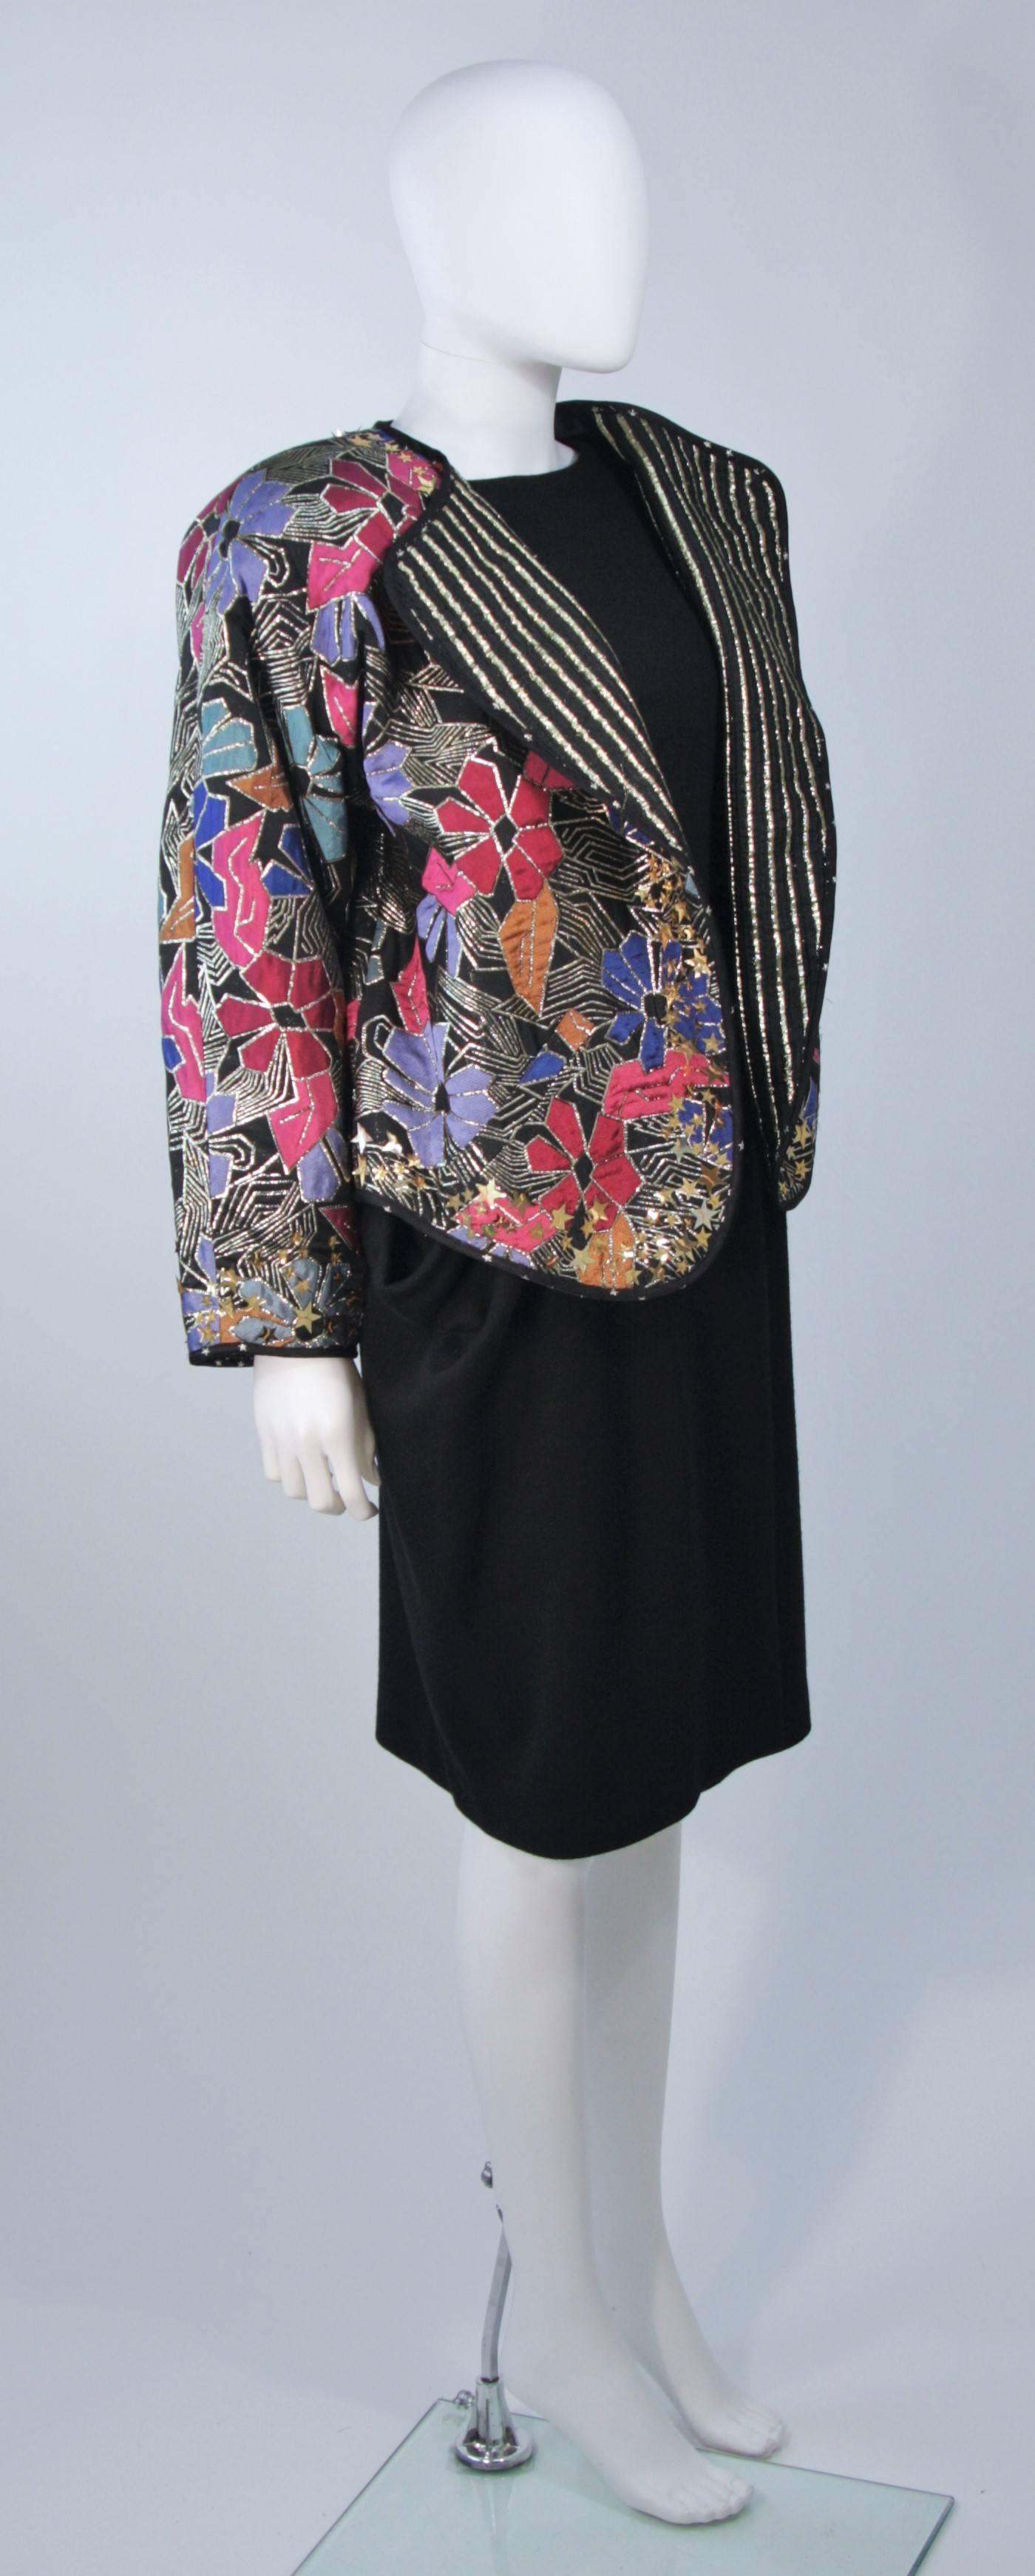 Women's GEOFFREY BEENE COUTURE Reversible Embellished Jacket and Draped Dress Size 6-8